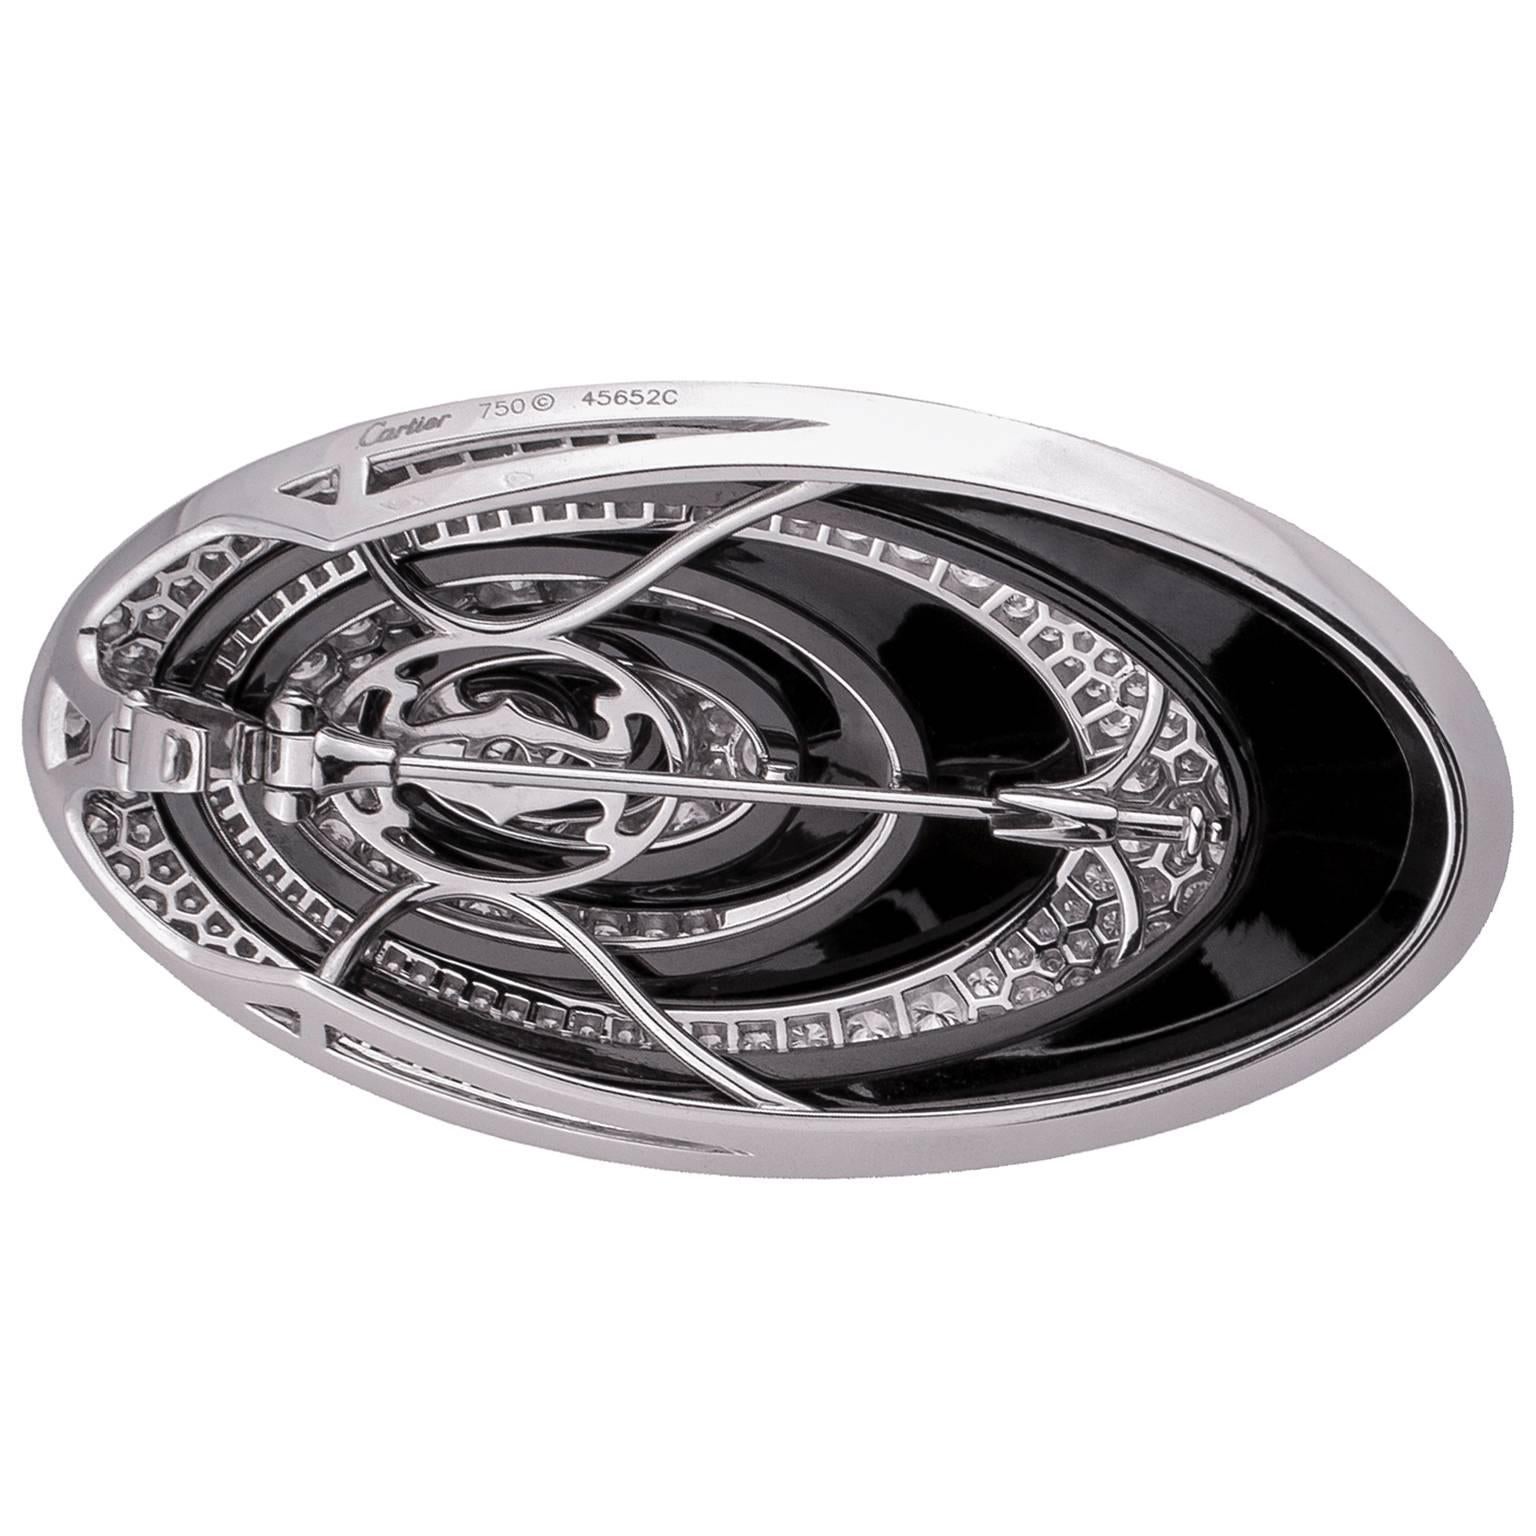 Stunning Cartier pendant in white gold shaped as alternating ellipses of onyx and pave of round brilliant cut diamonds, this piece can also be used as an attractive brooch. Set with a total of 269 round brilliant diamonds in pave setting, totalling